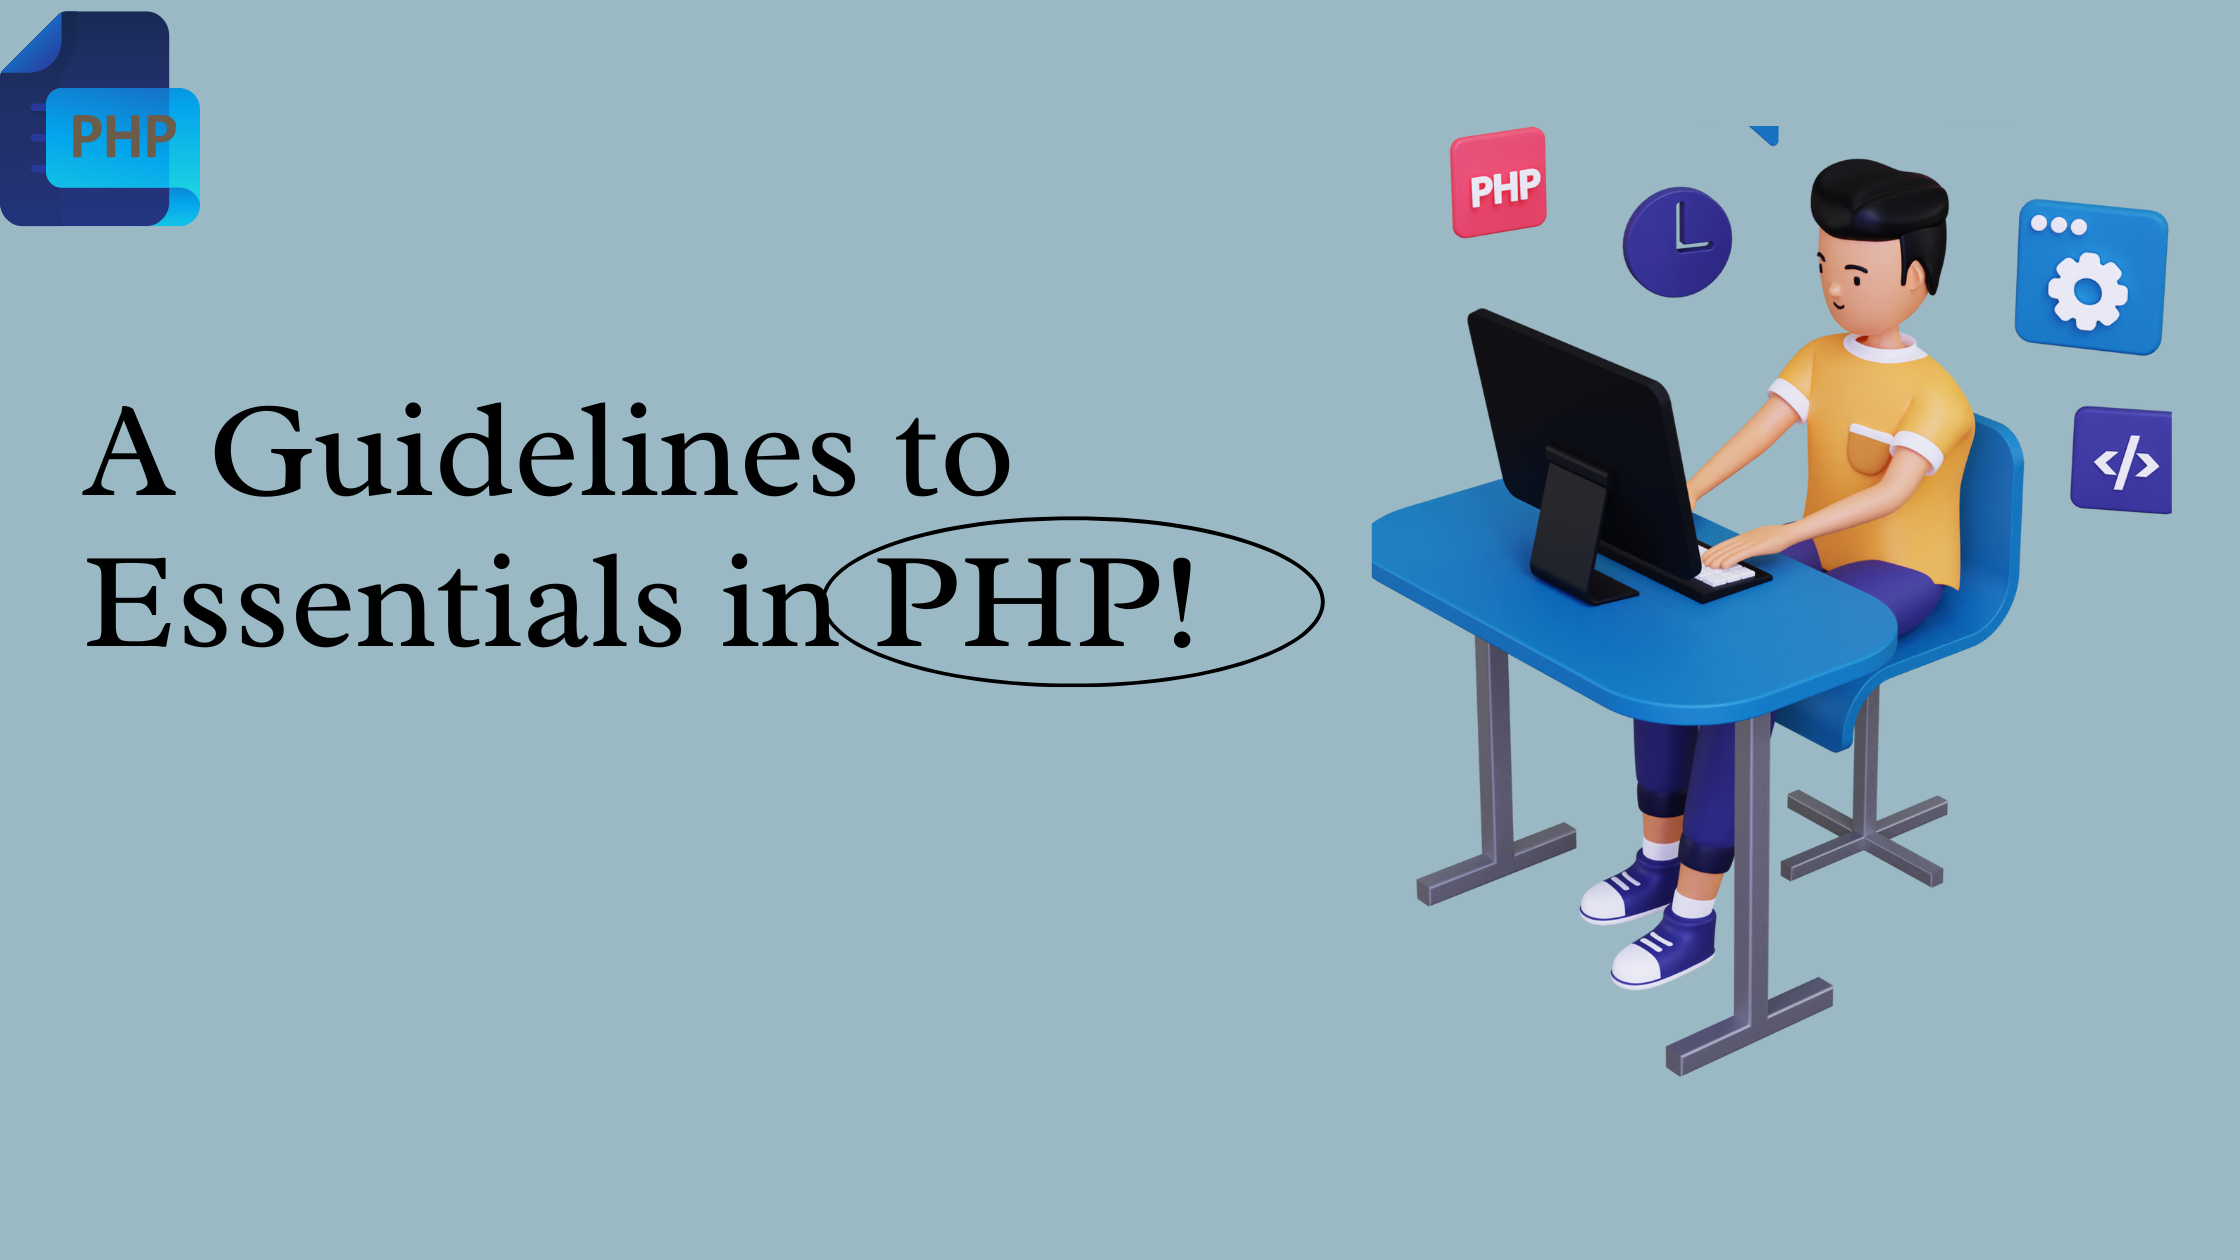 Essentials of PHP Learning: